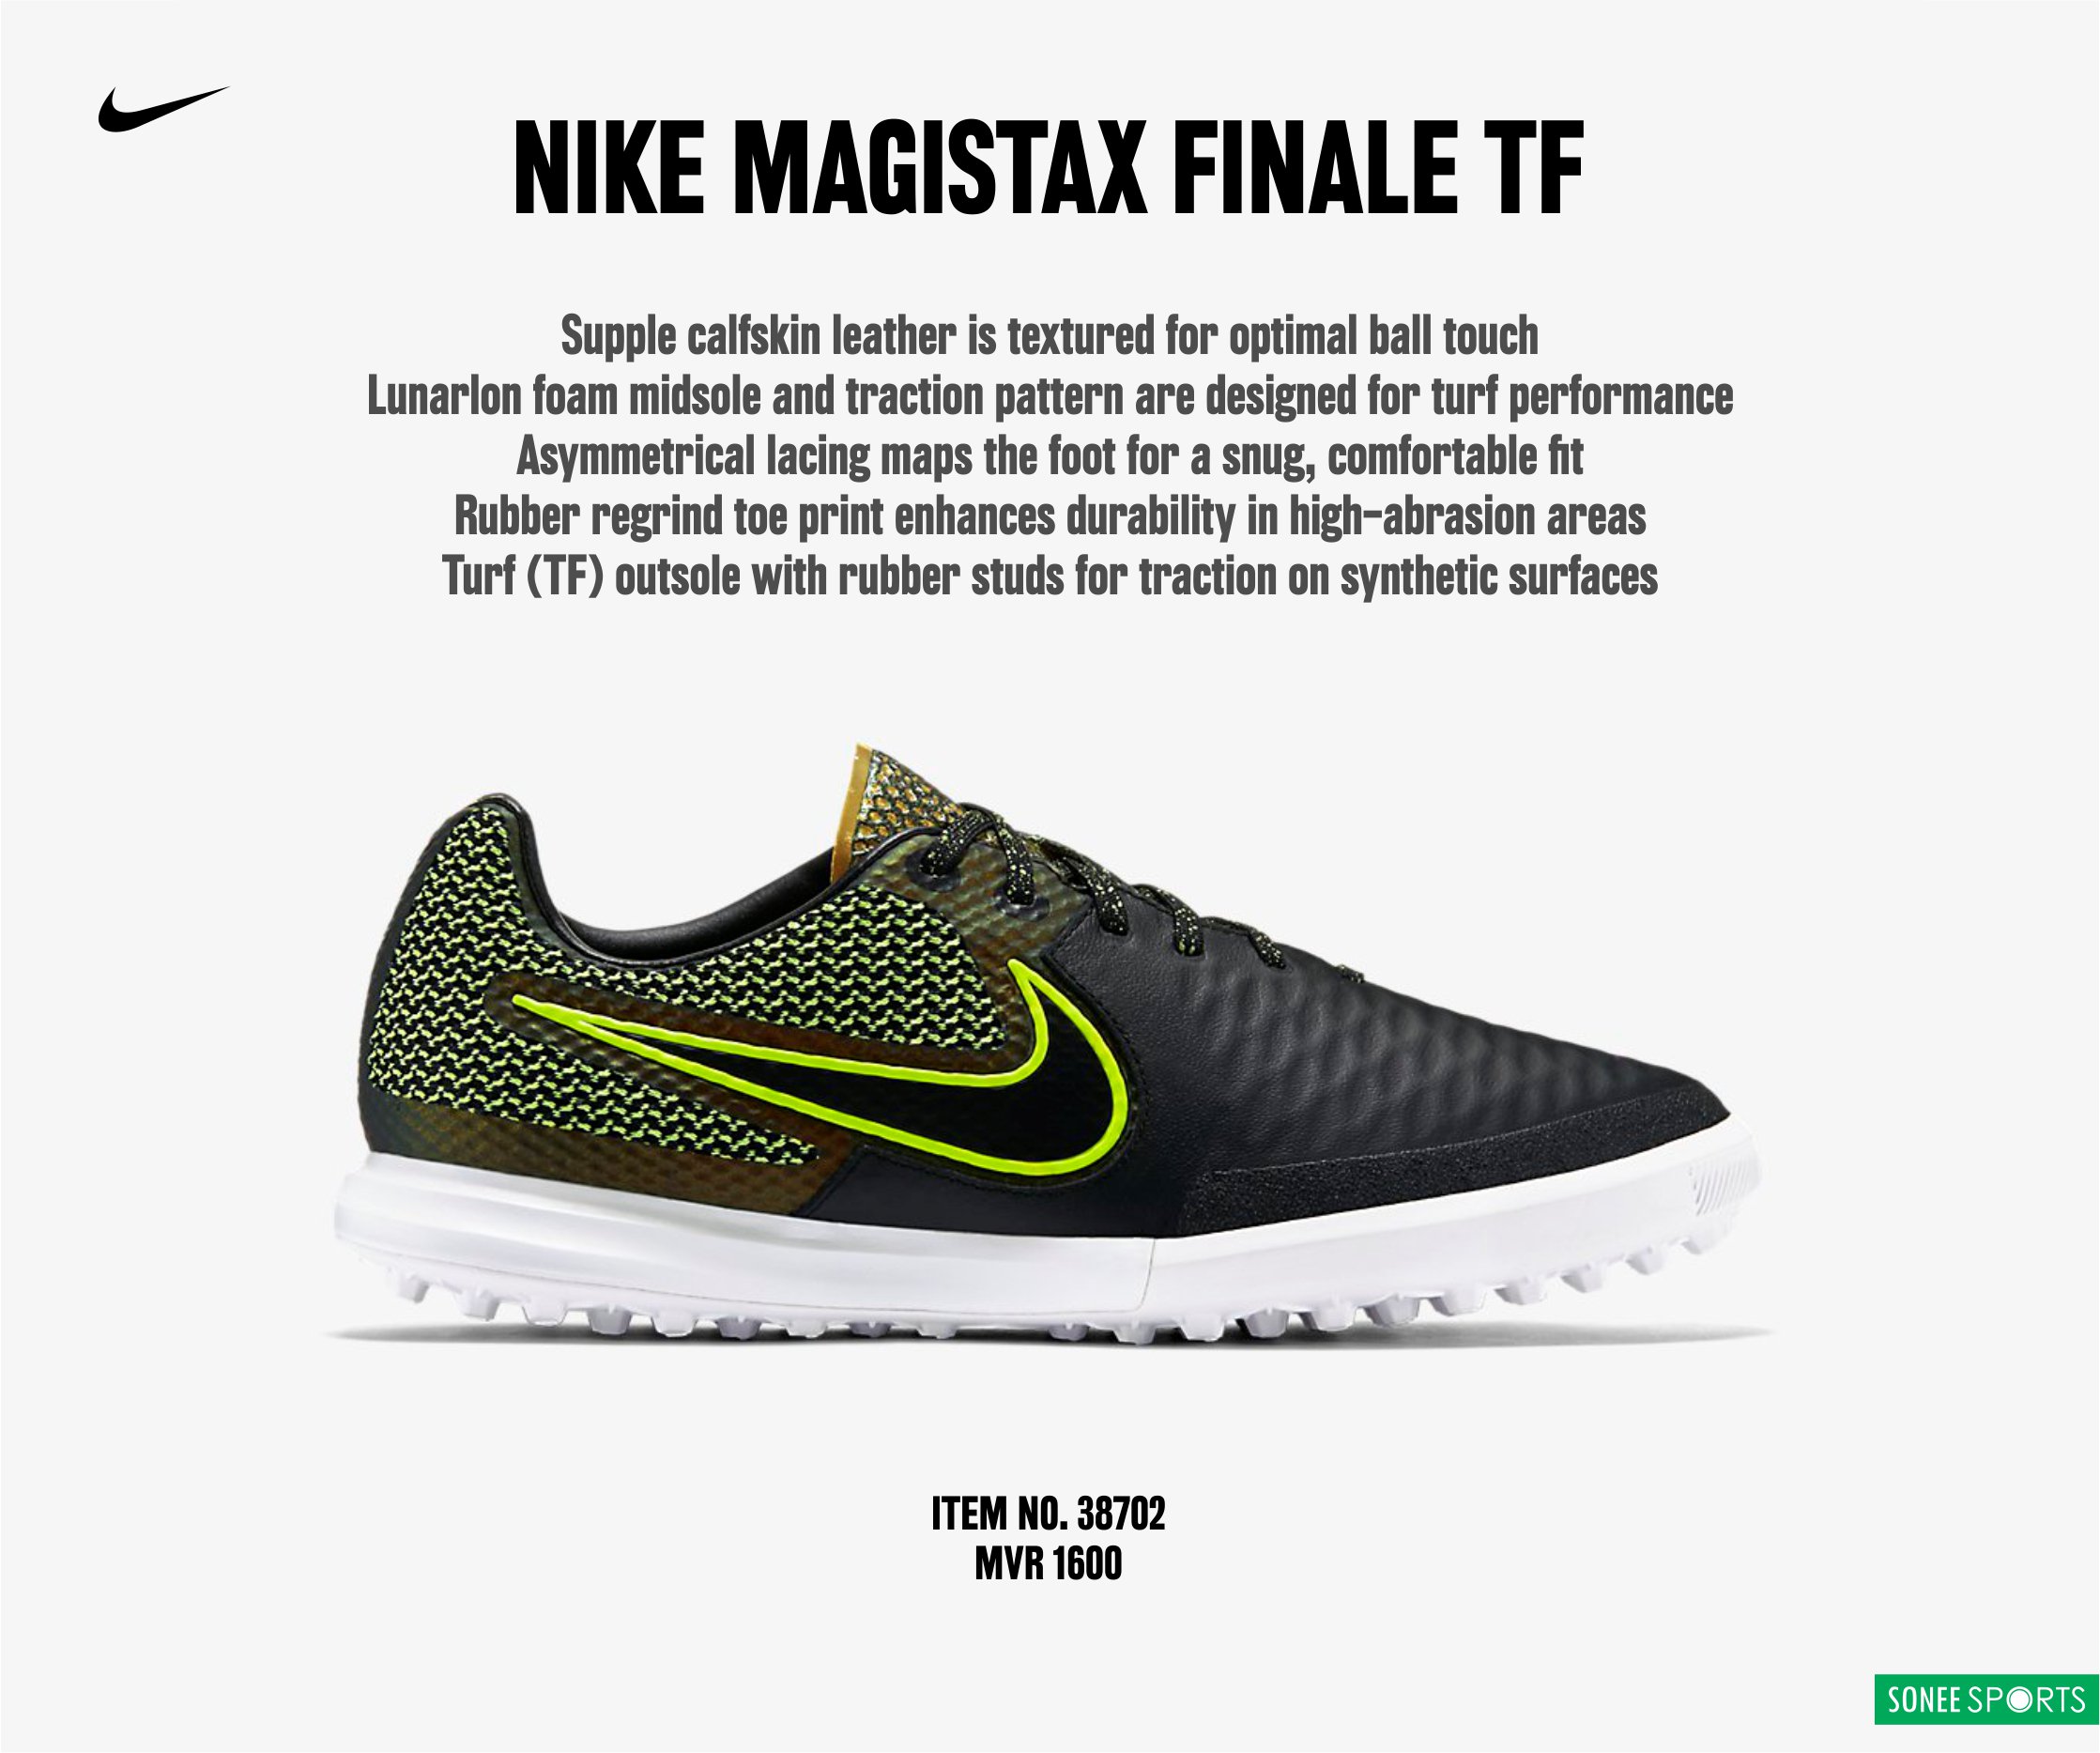 Sonee Sports on Twitter: "Playmaking Remixed with Nike MagistaX Finale TF. https://t.co/DMBlQrc3Pp" /